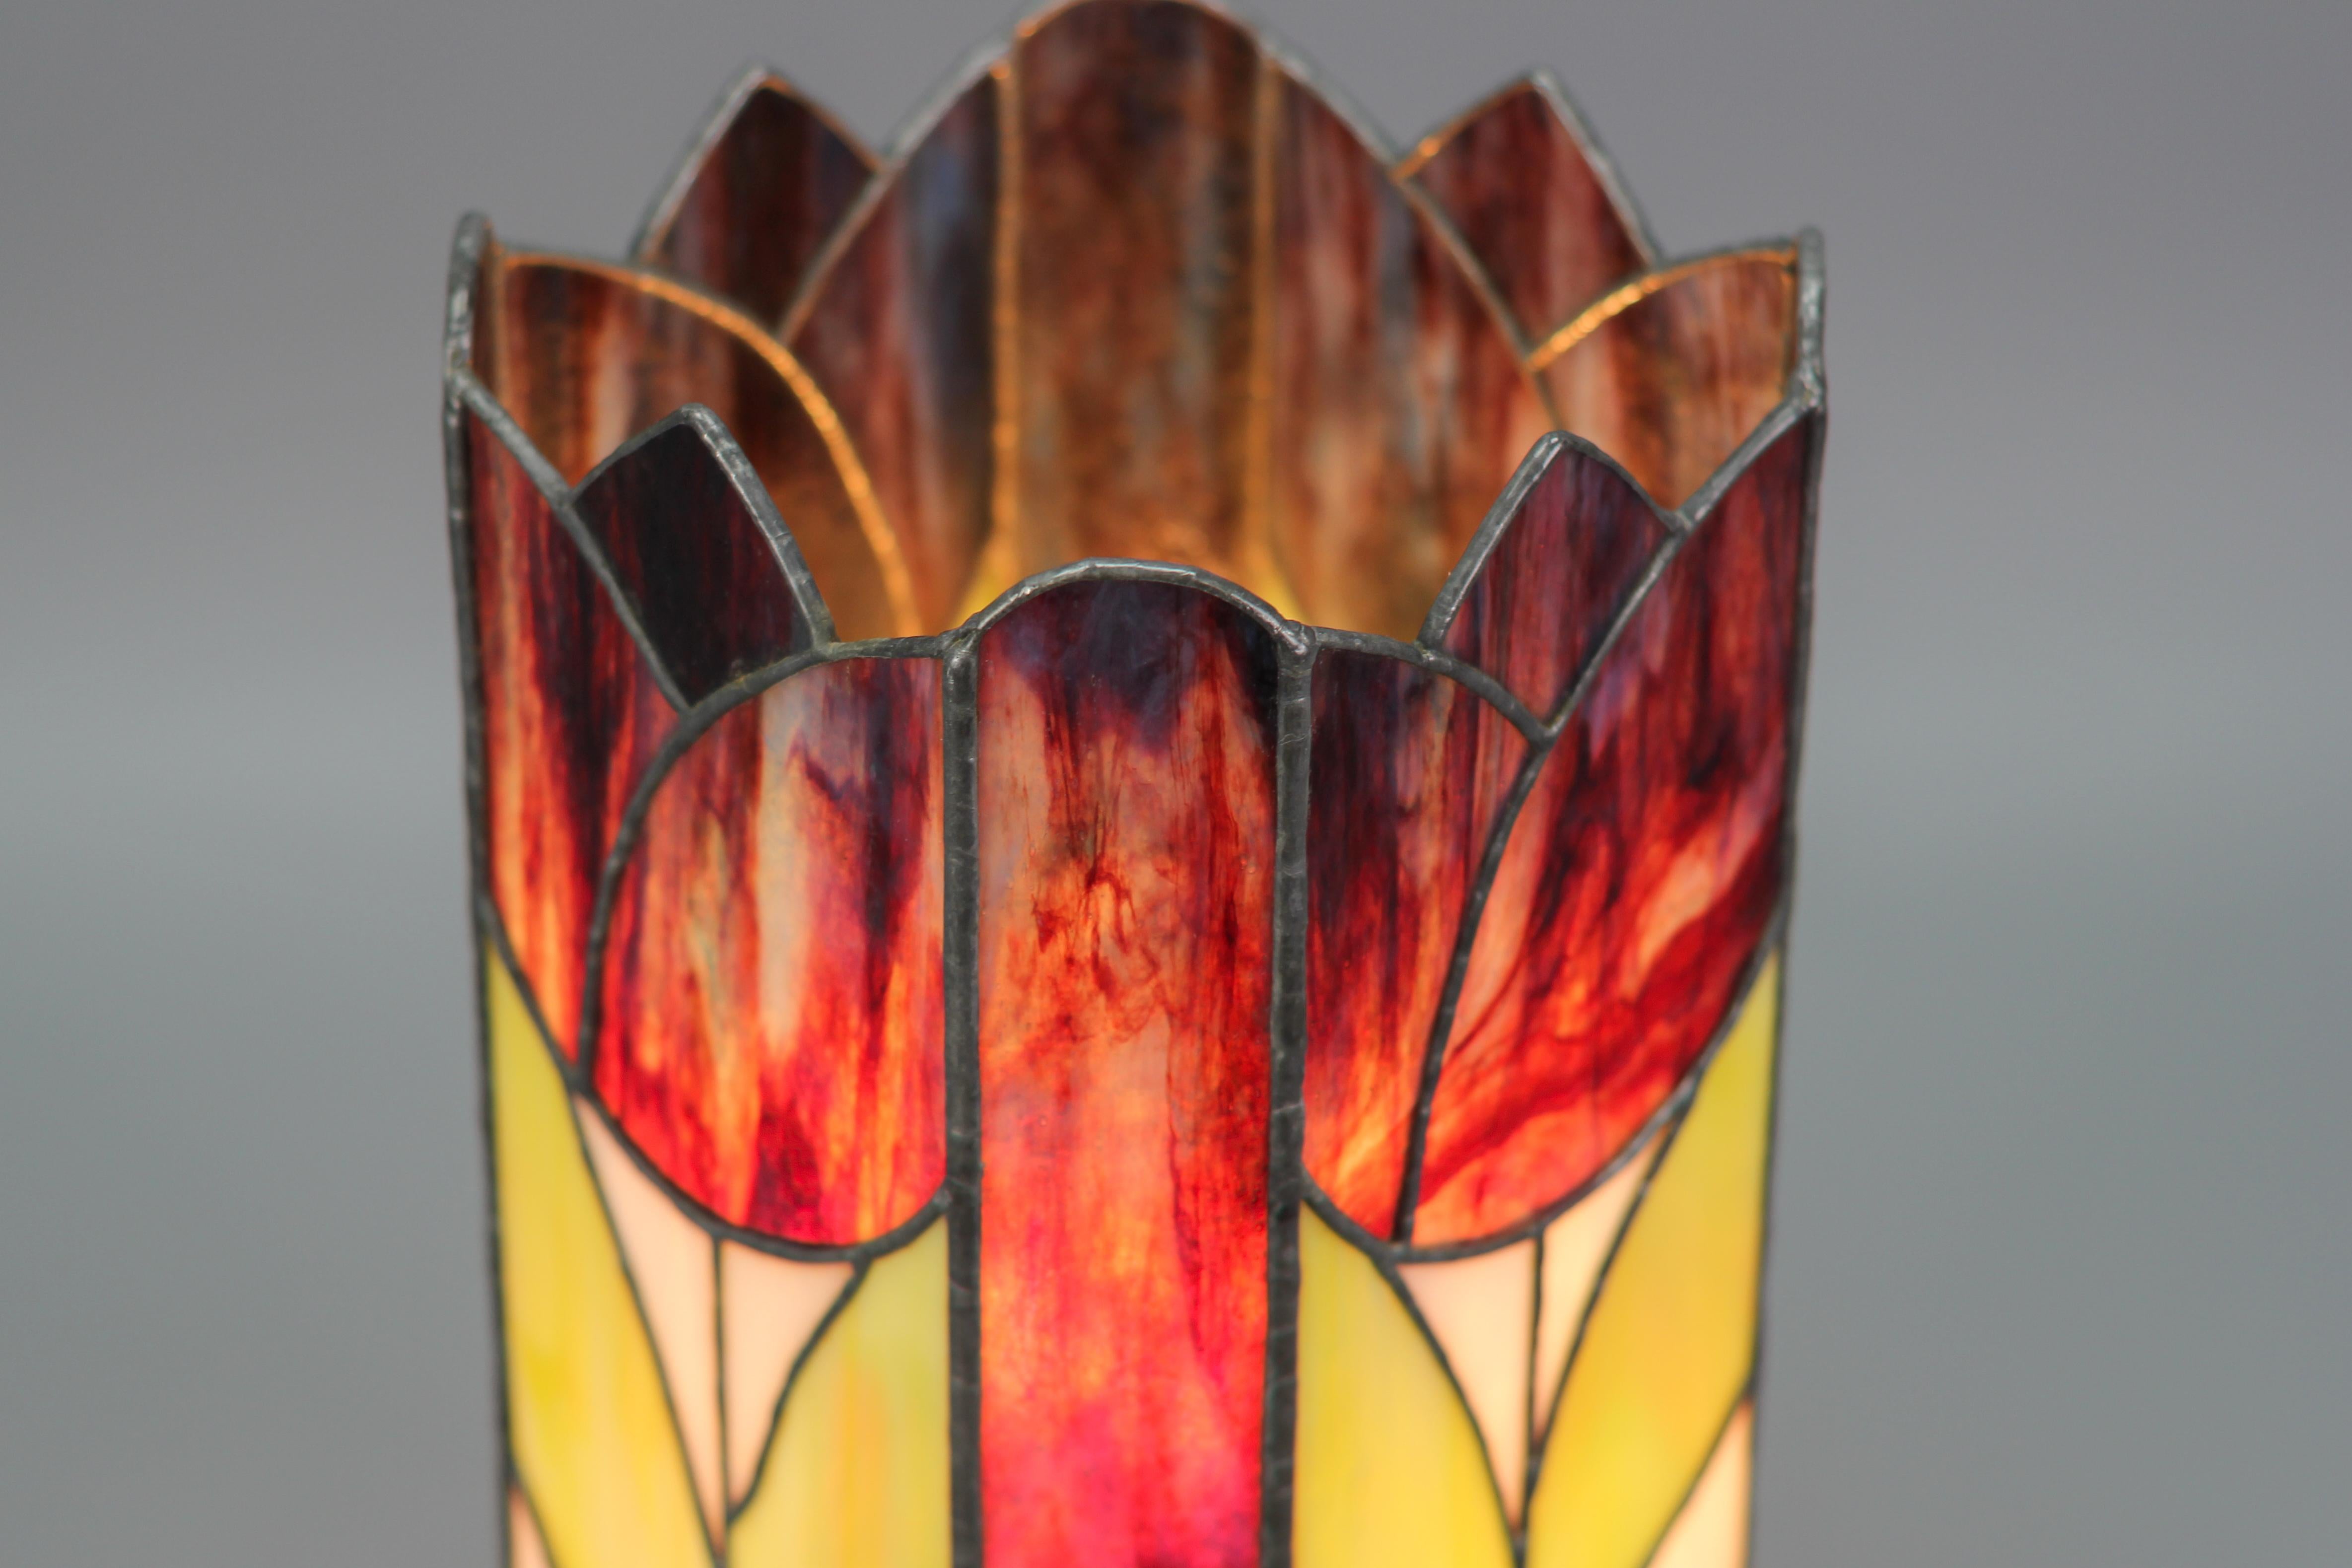 Vintage Tiffany-Style Stained Glass Square Lamp Tulips 1